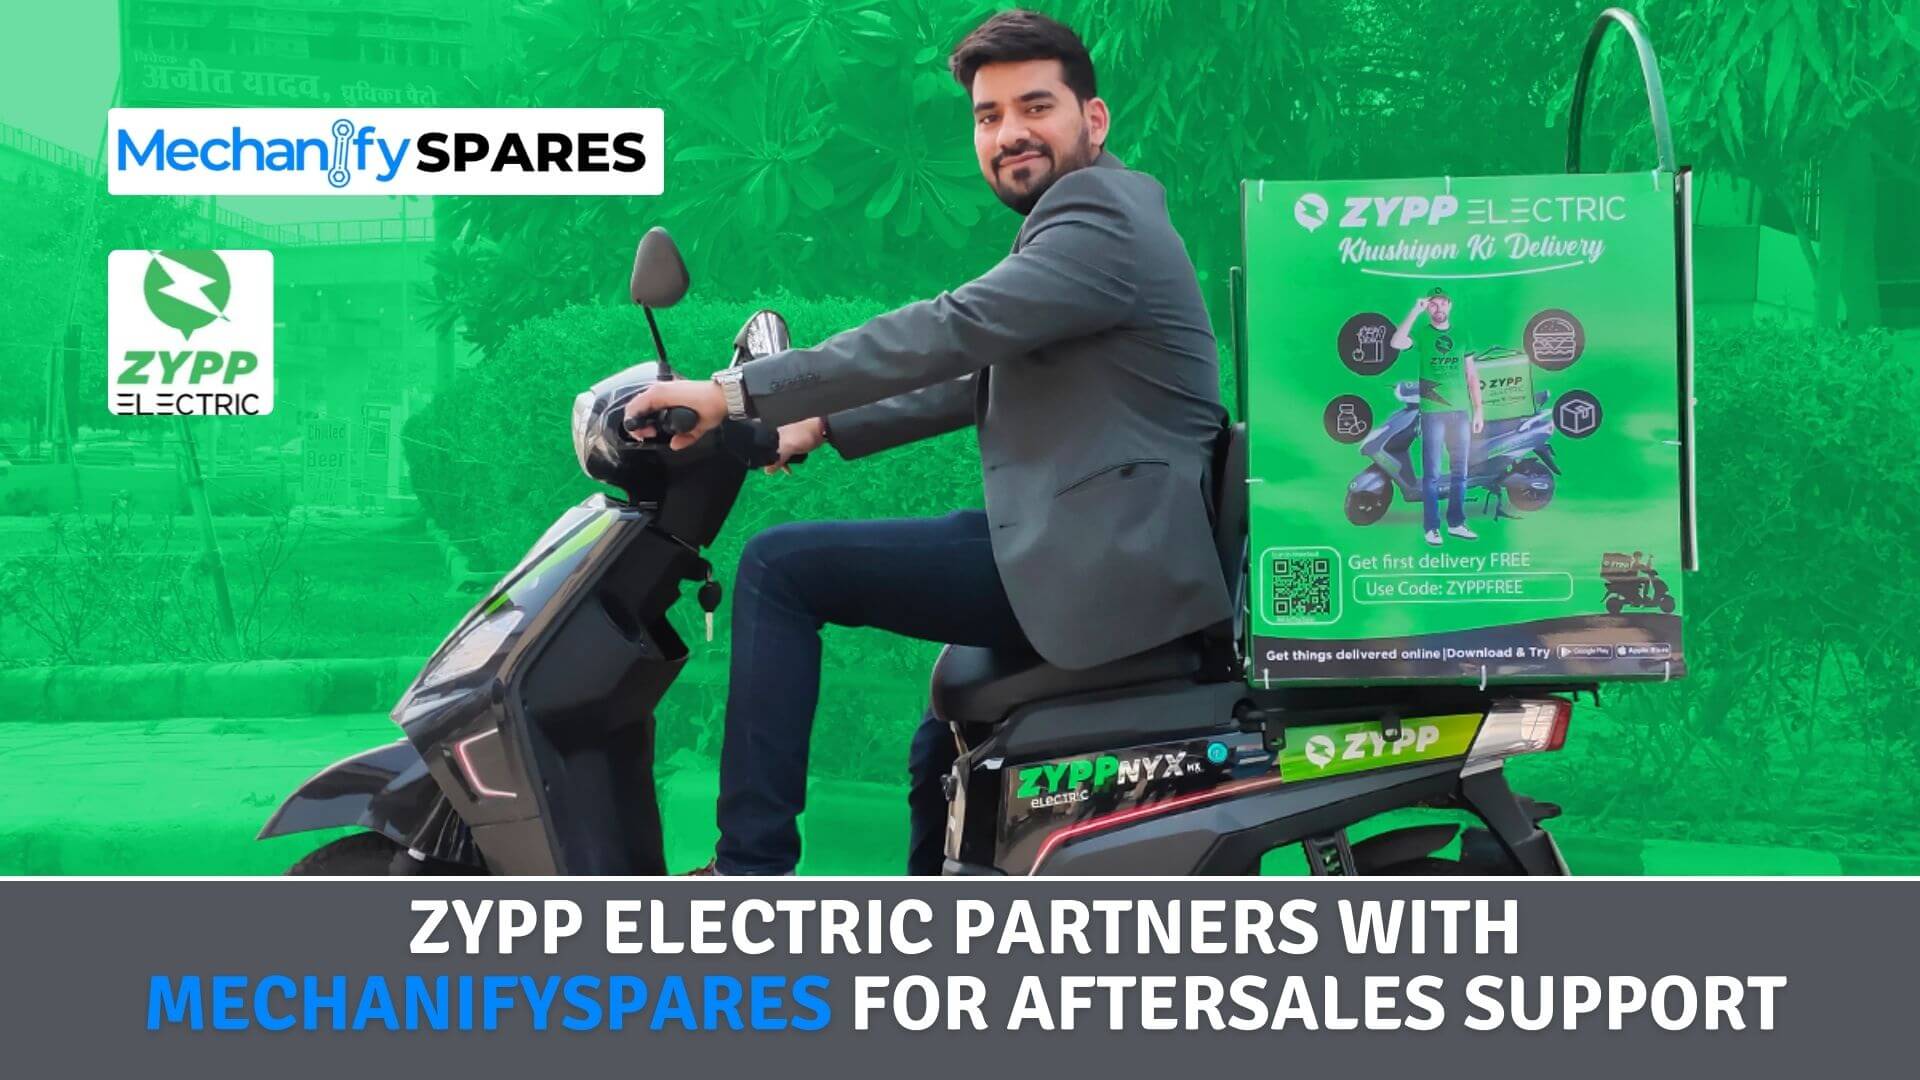 https://e-vehicleinfo.com/zypp-electric-partners-with-mechanifyspares-2022/